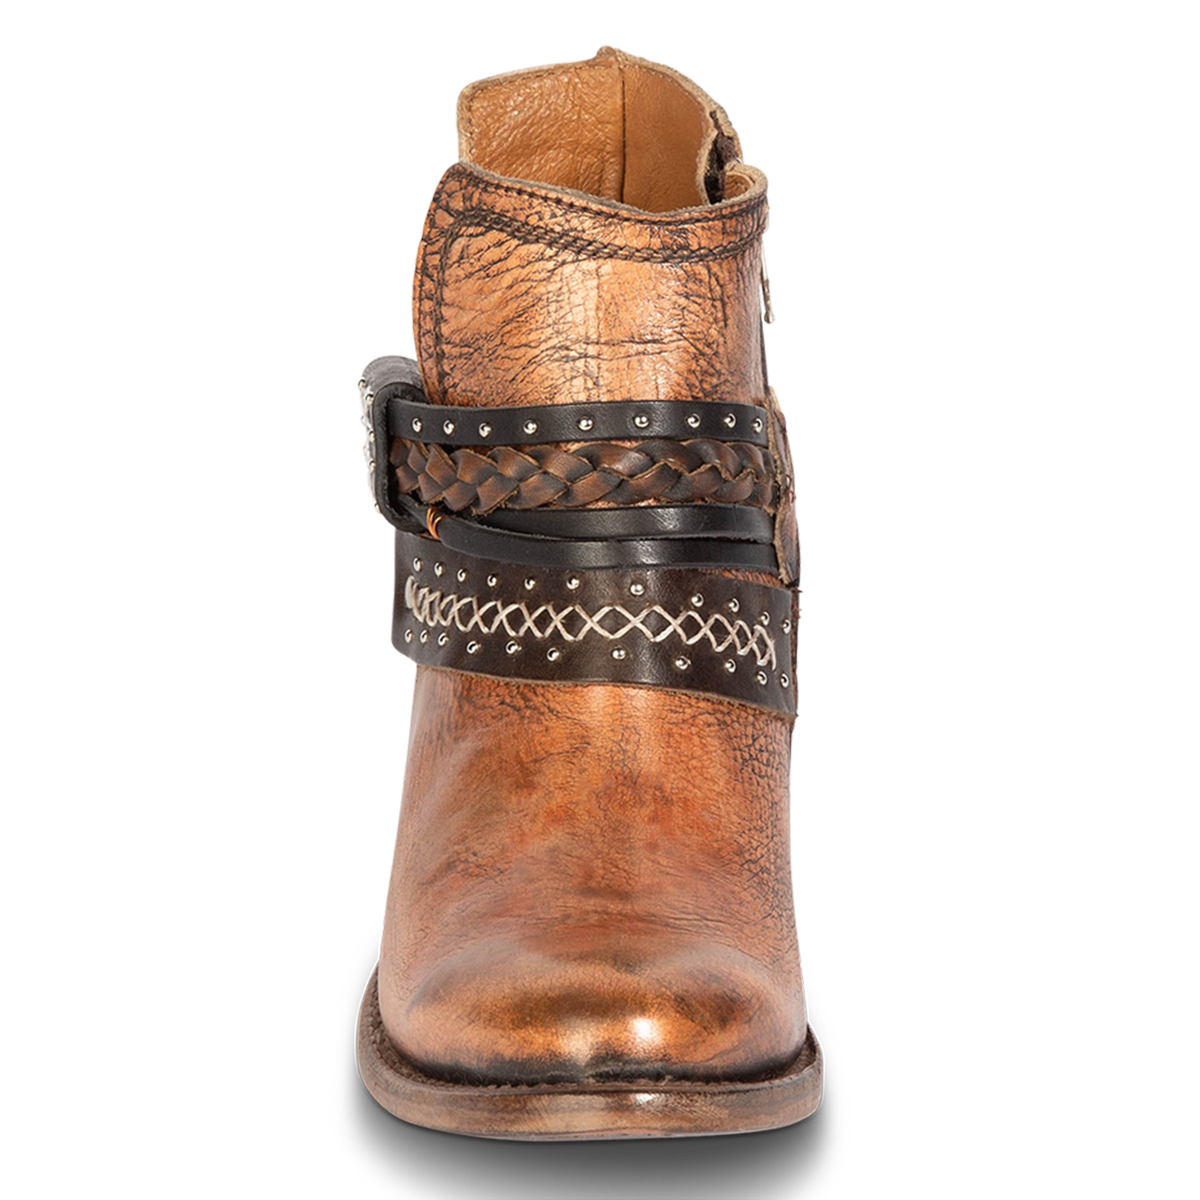 Front view showing embellished decorative belts on FREEBIRD women's Sabelle bronze bootie